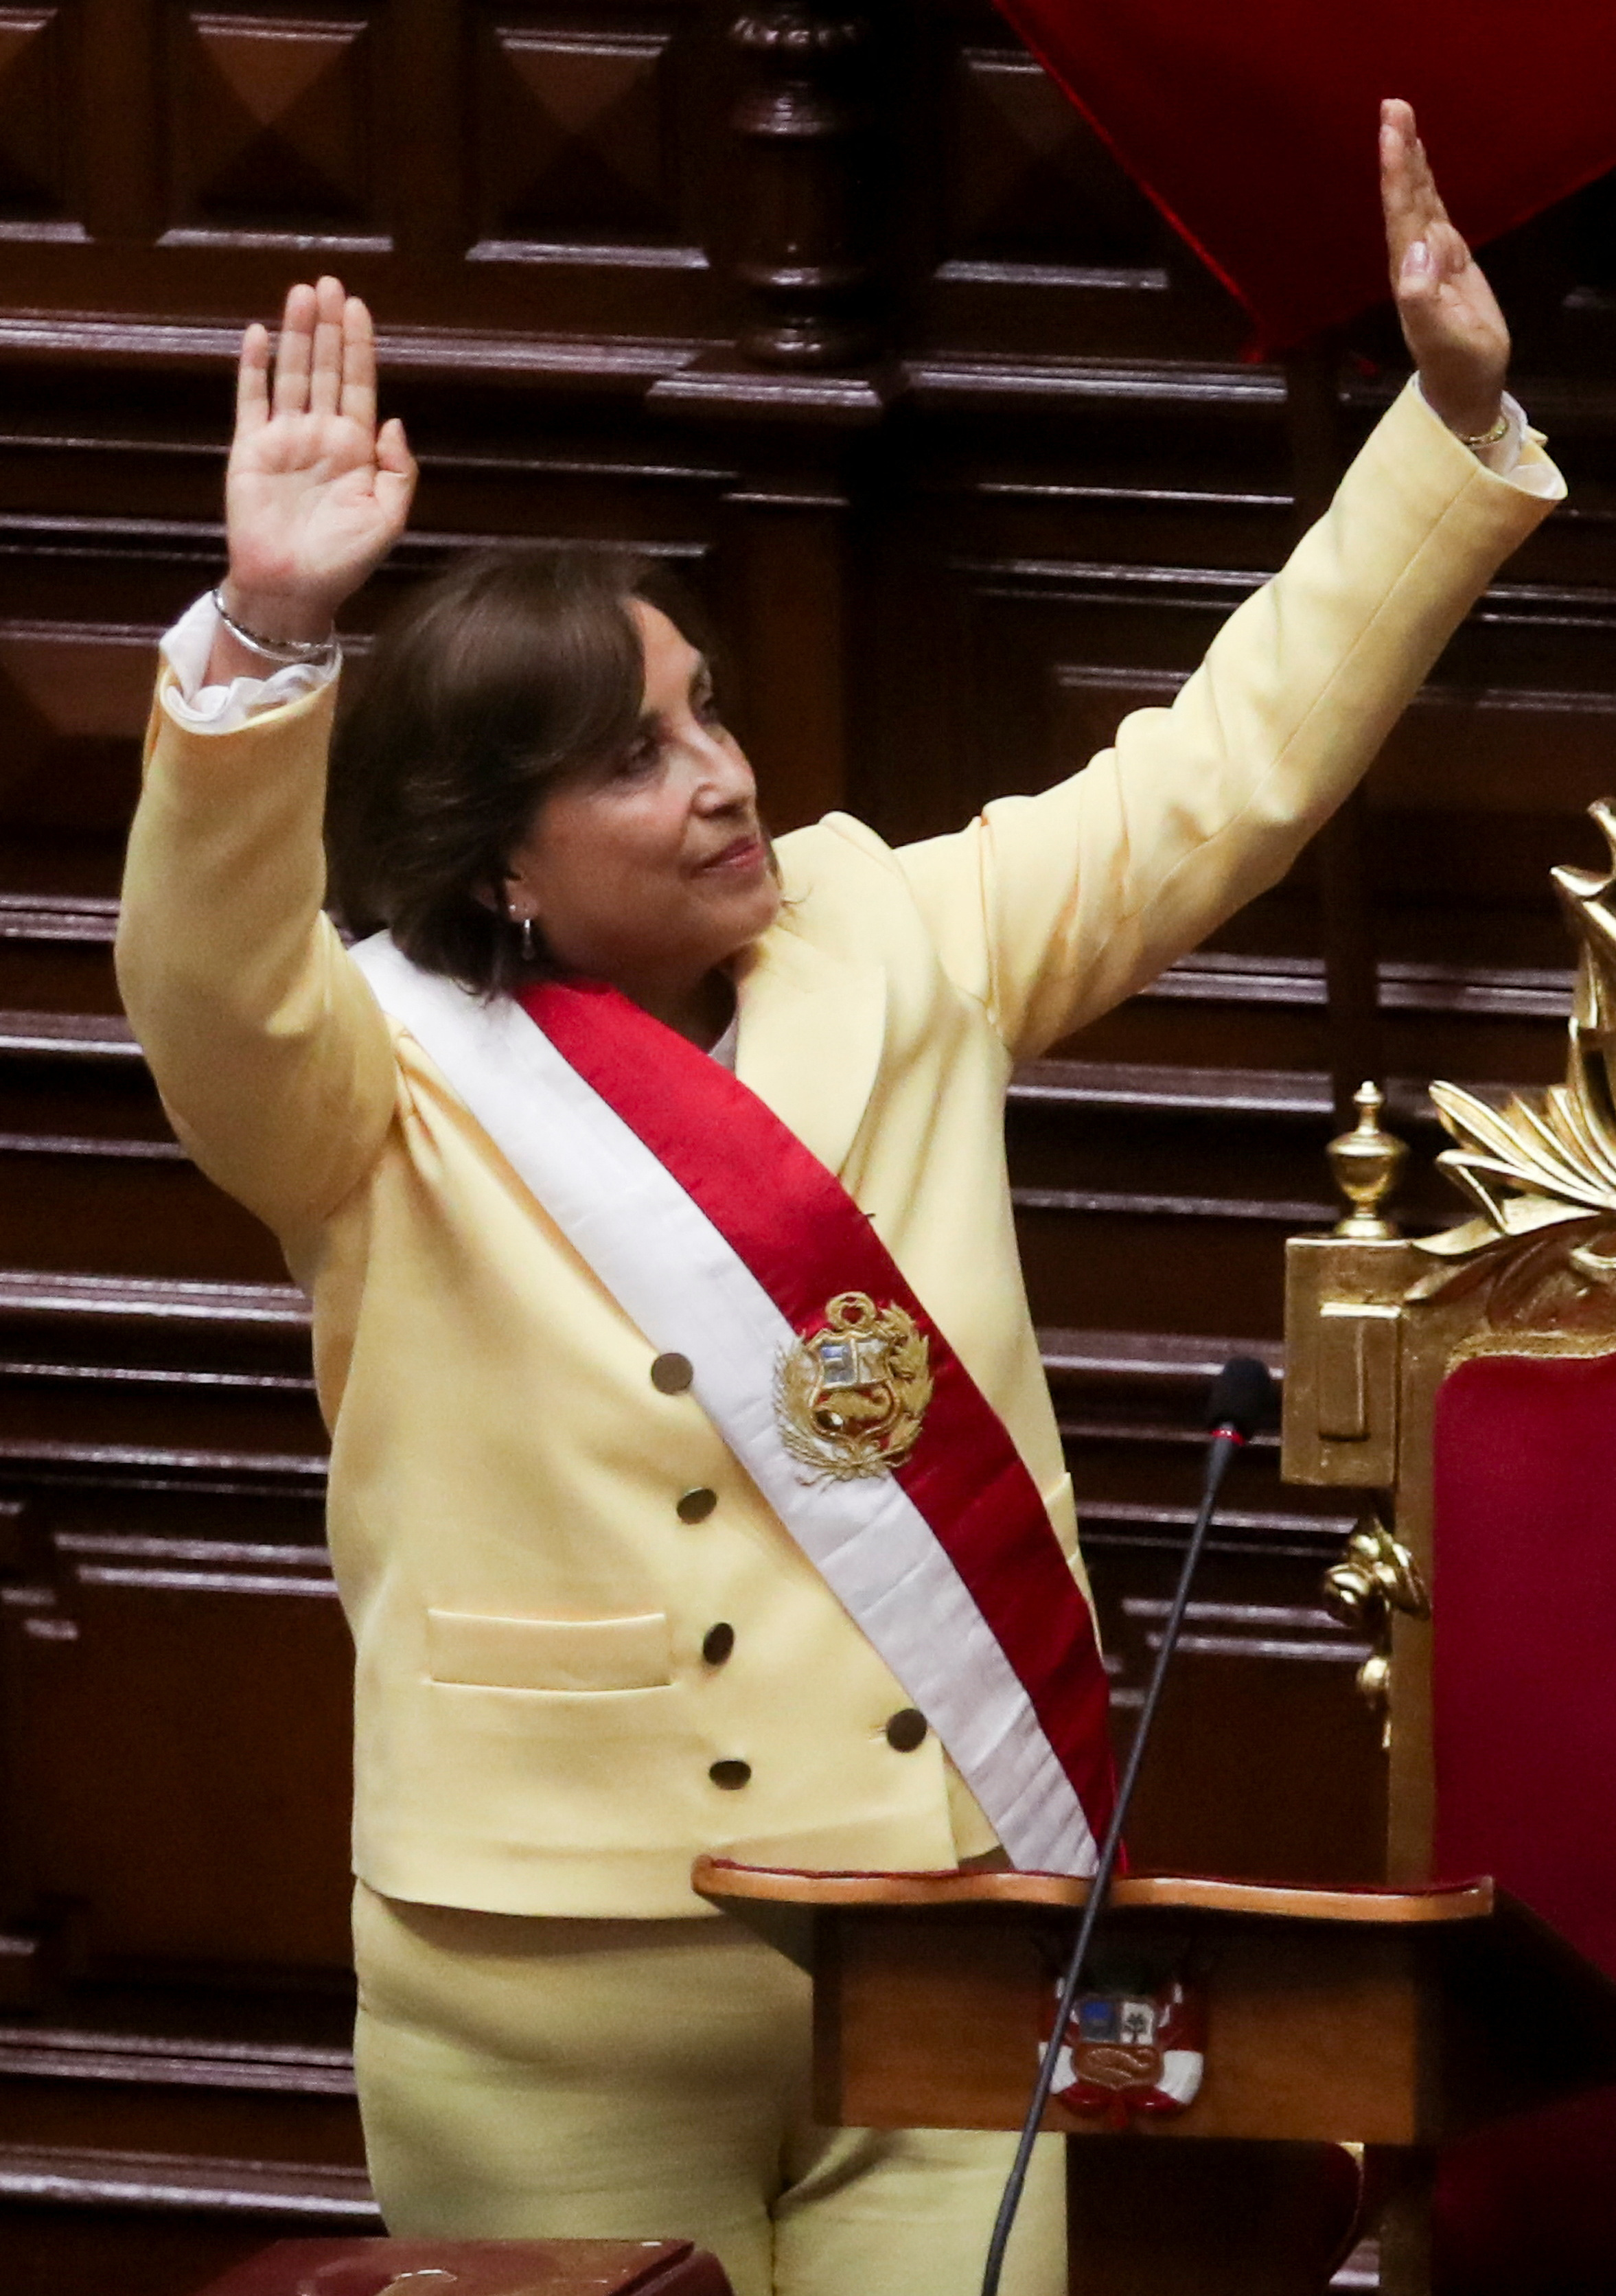 Peru's Vice President Dina Boluarte, who was called on by Congress to take the office of president after the legislature approved the removal of President Pedro Castillo in an impeachment trial, attends her swearing-in ceremony in Lima, Peru December 7, 2022. REUTERS/Sebastian Castaneda